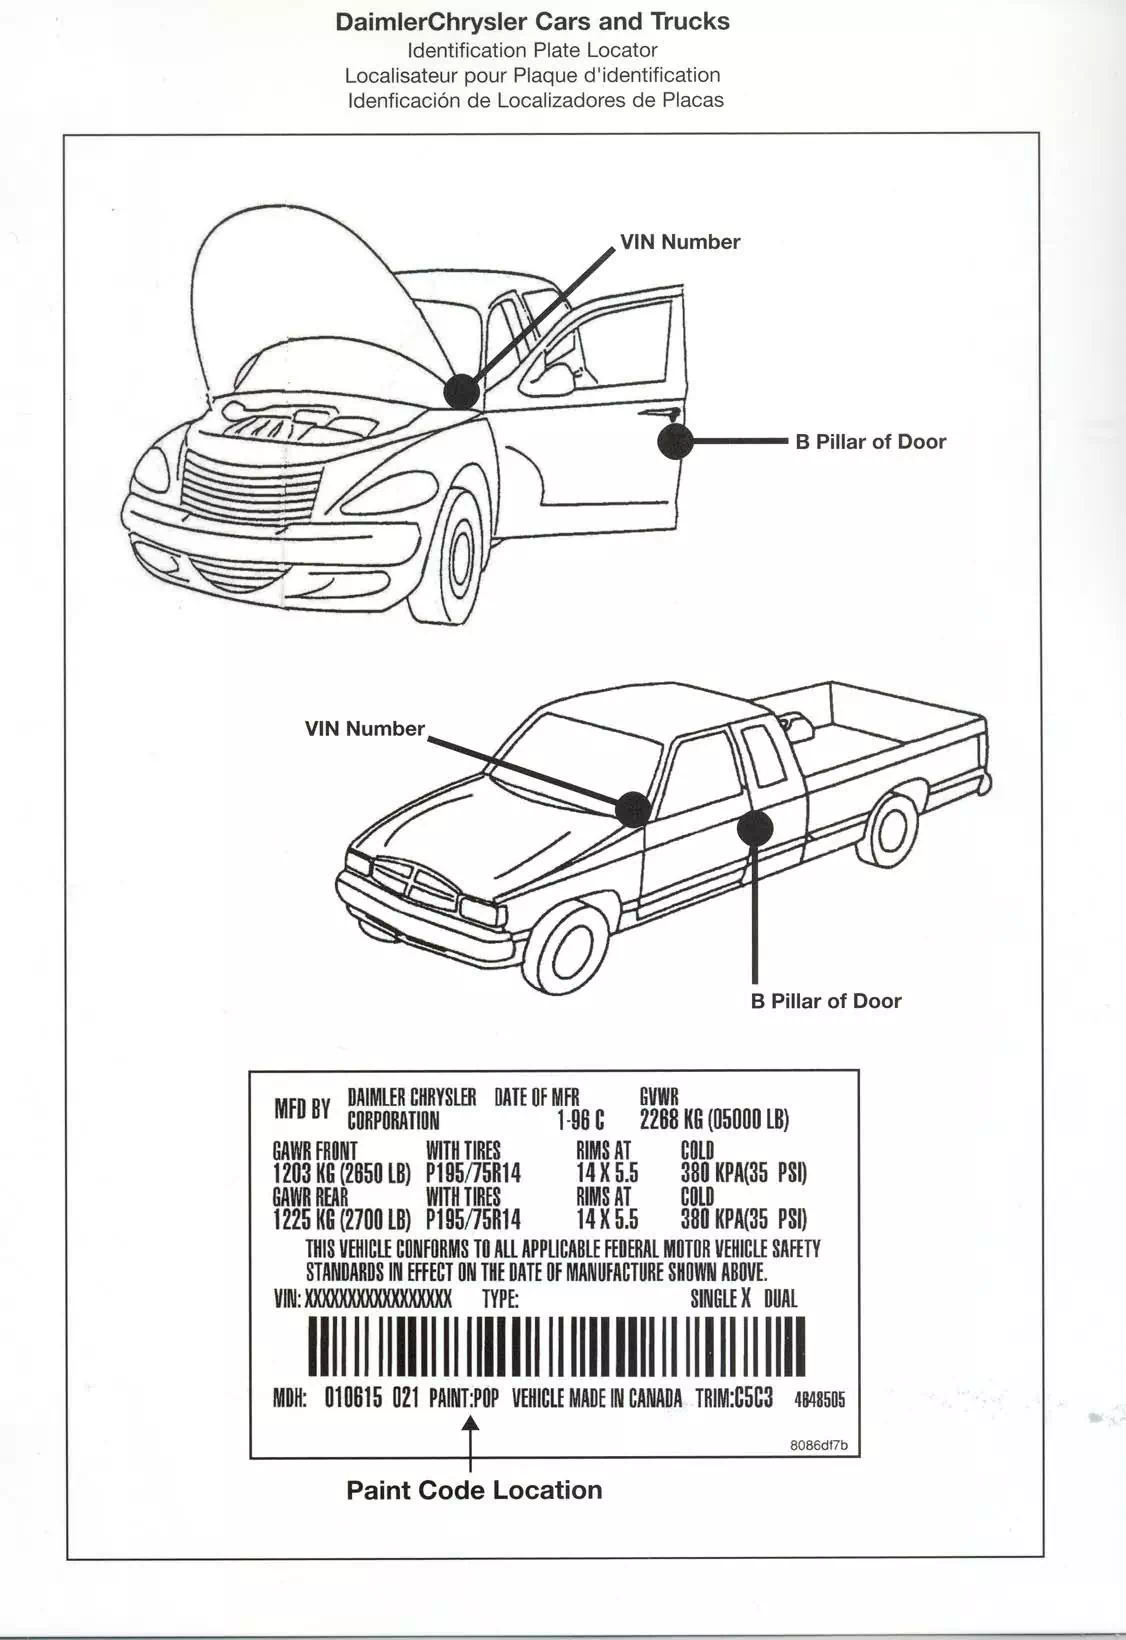 Picture showing how to look up a paint code on the vehicle or how to find the paint code sticker